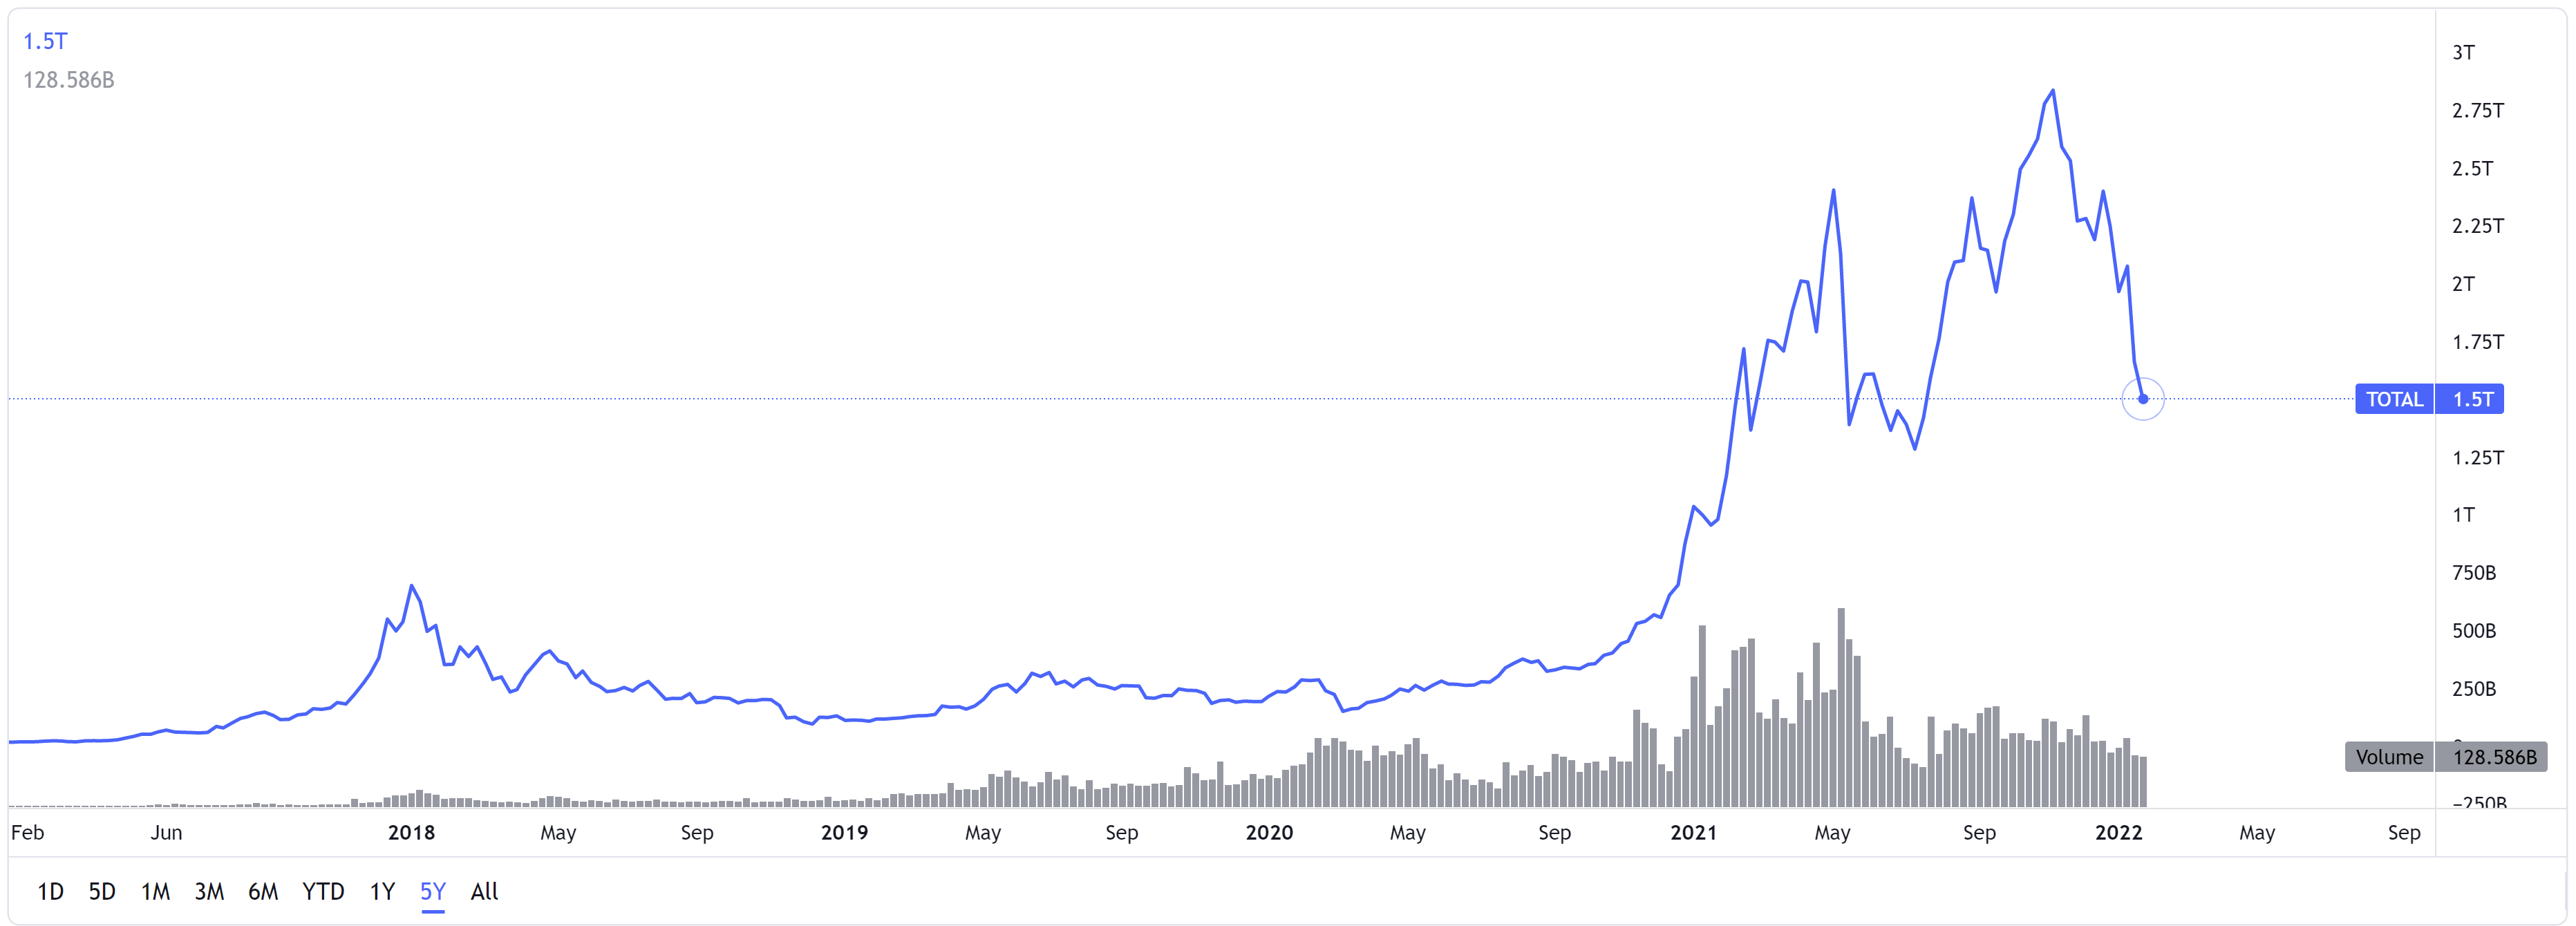 Graph depicting the total market cap of cryptocurrencies over the last 3 years